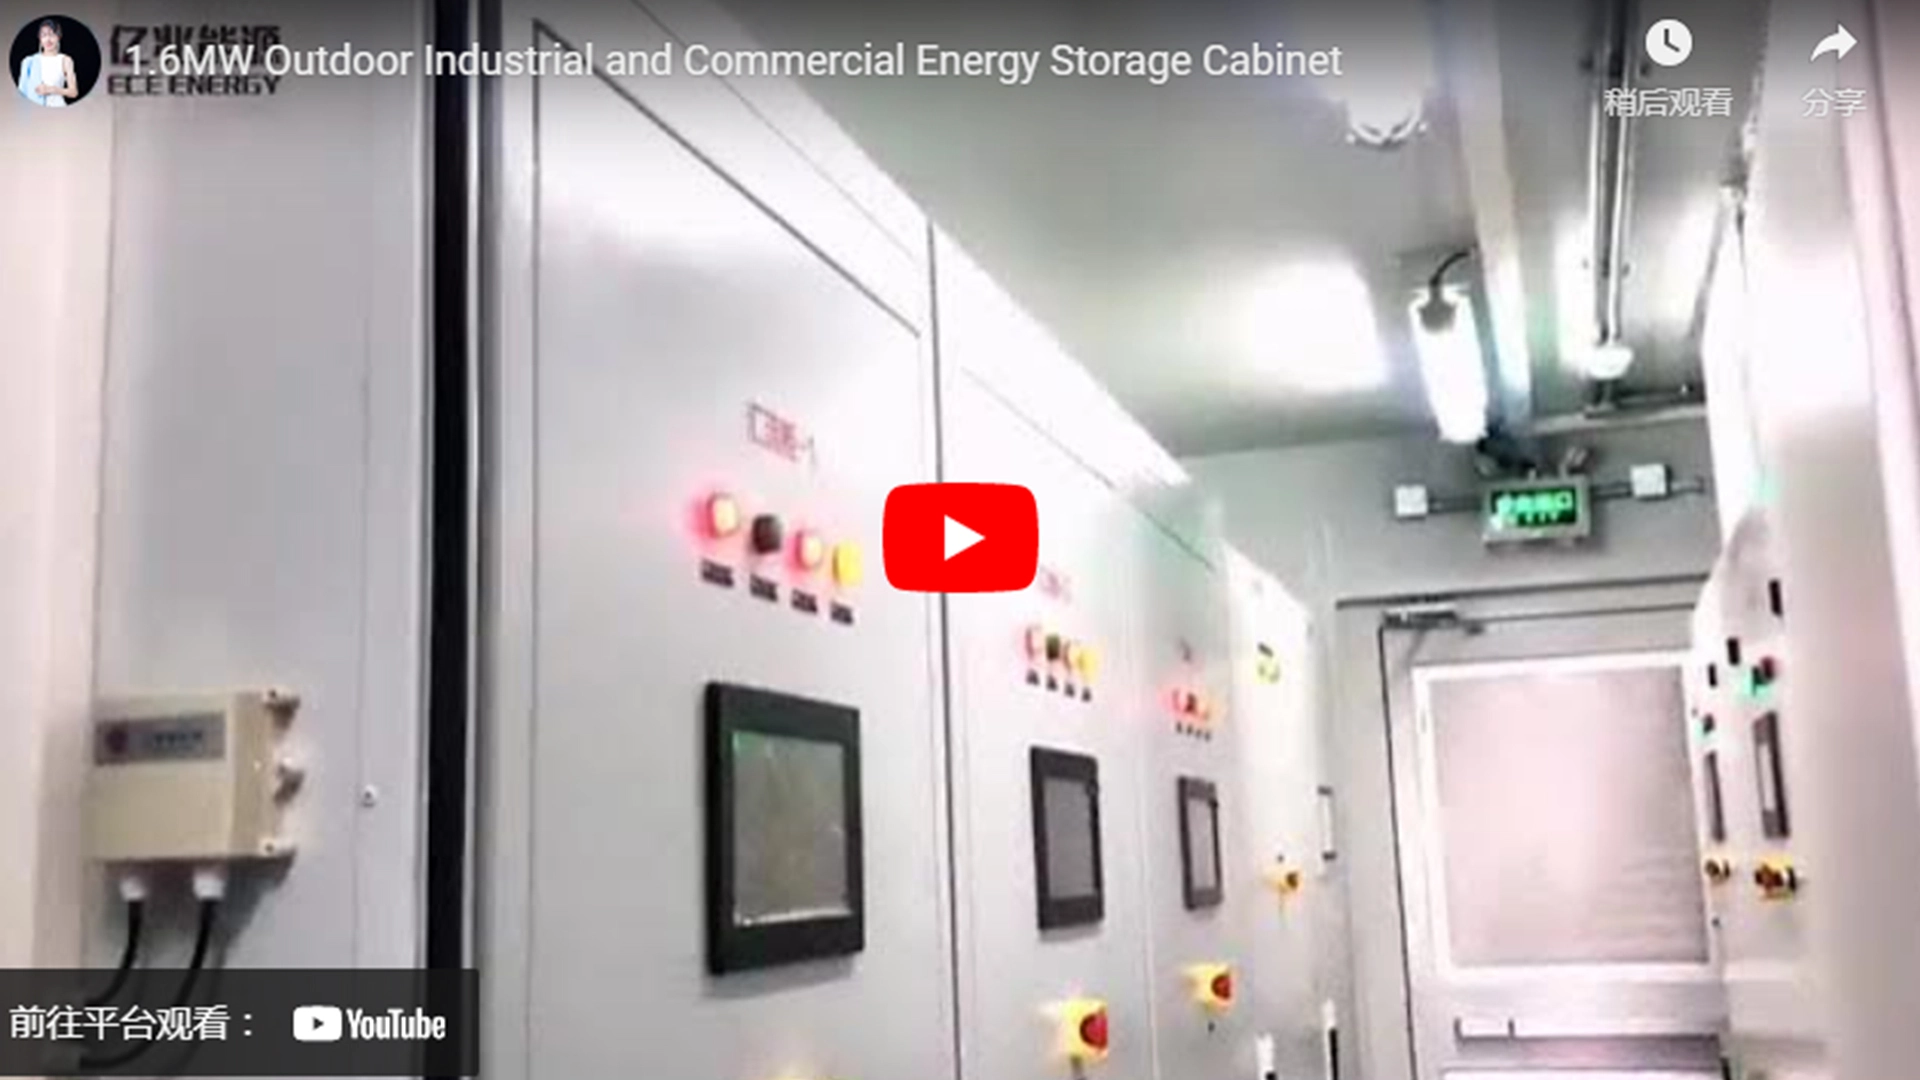 1.6MW Outdoor Industrial and Commercial Energy Storage Cabinet